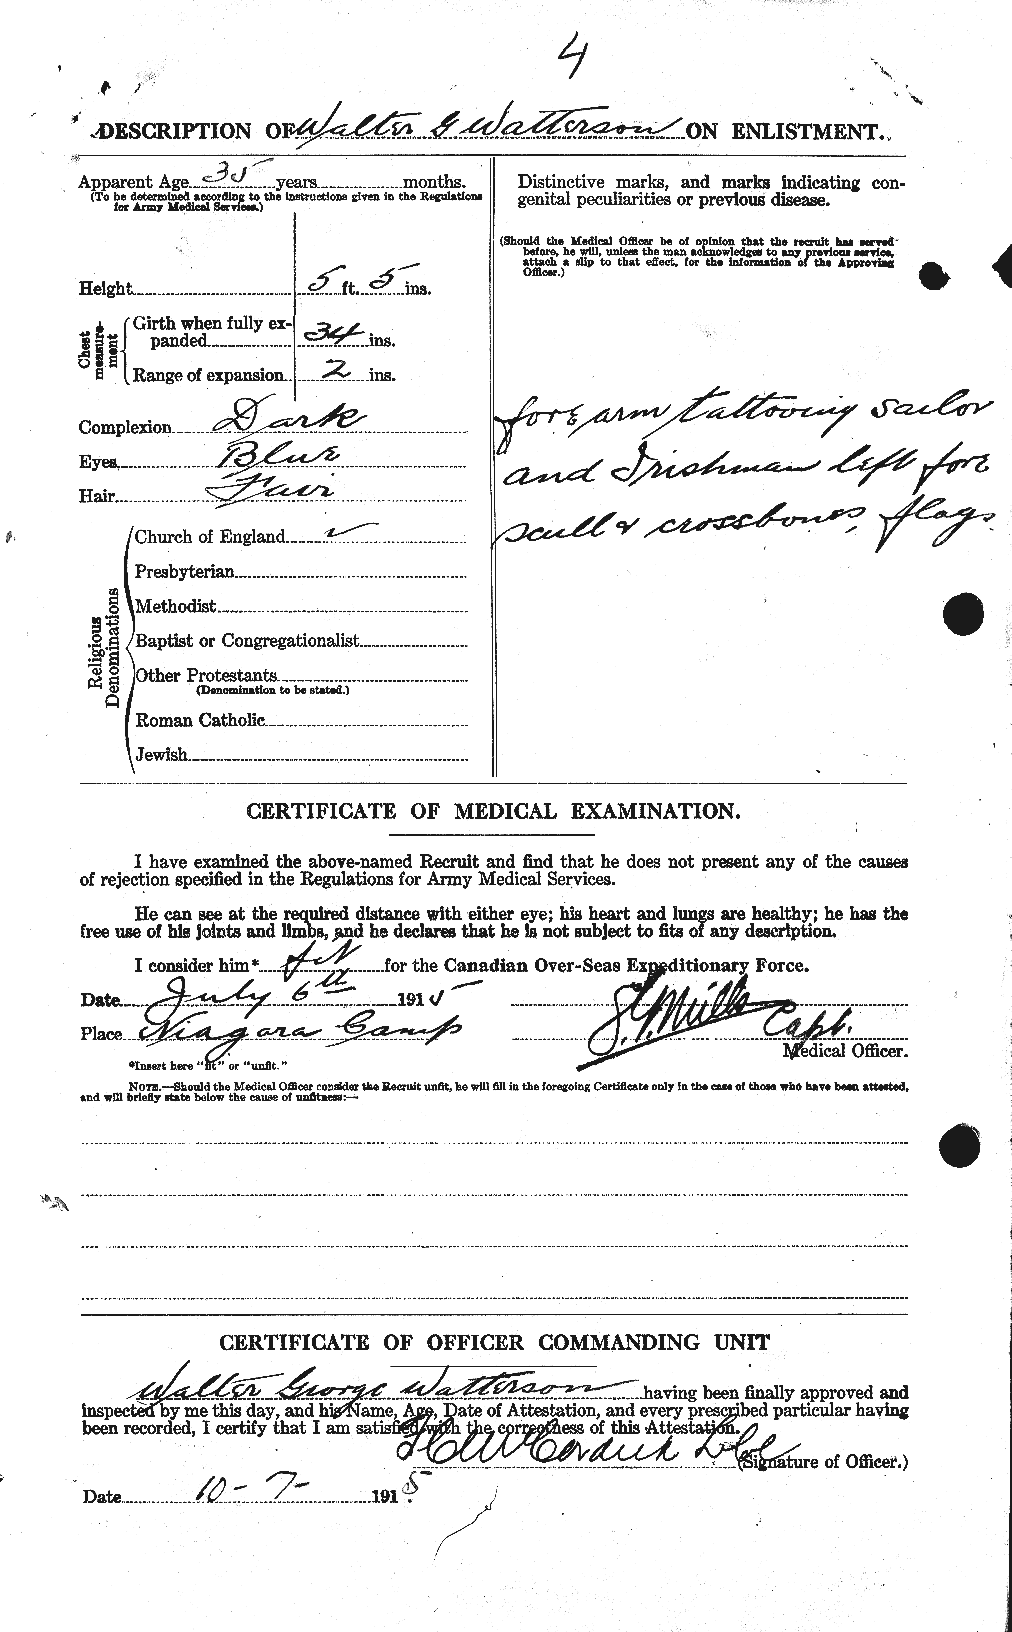 Personnel Records of the First World War - CEF 662659b